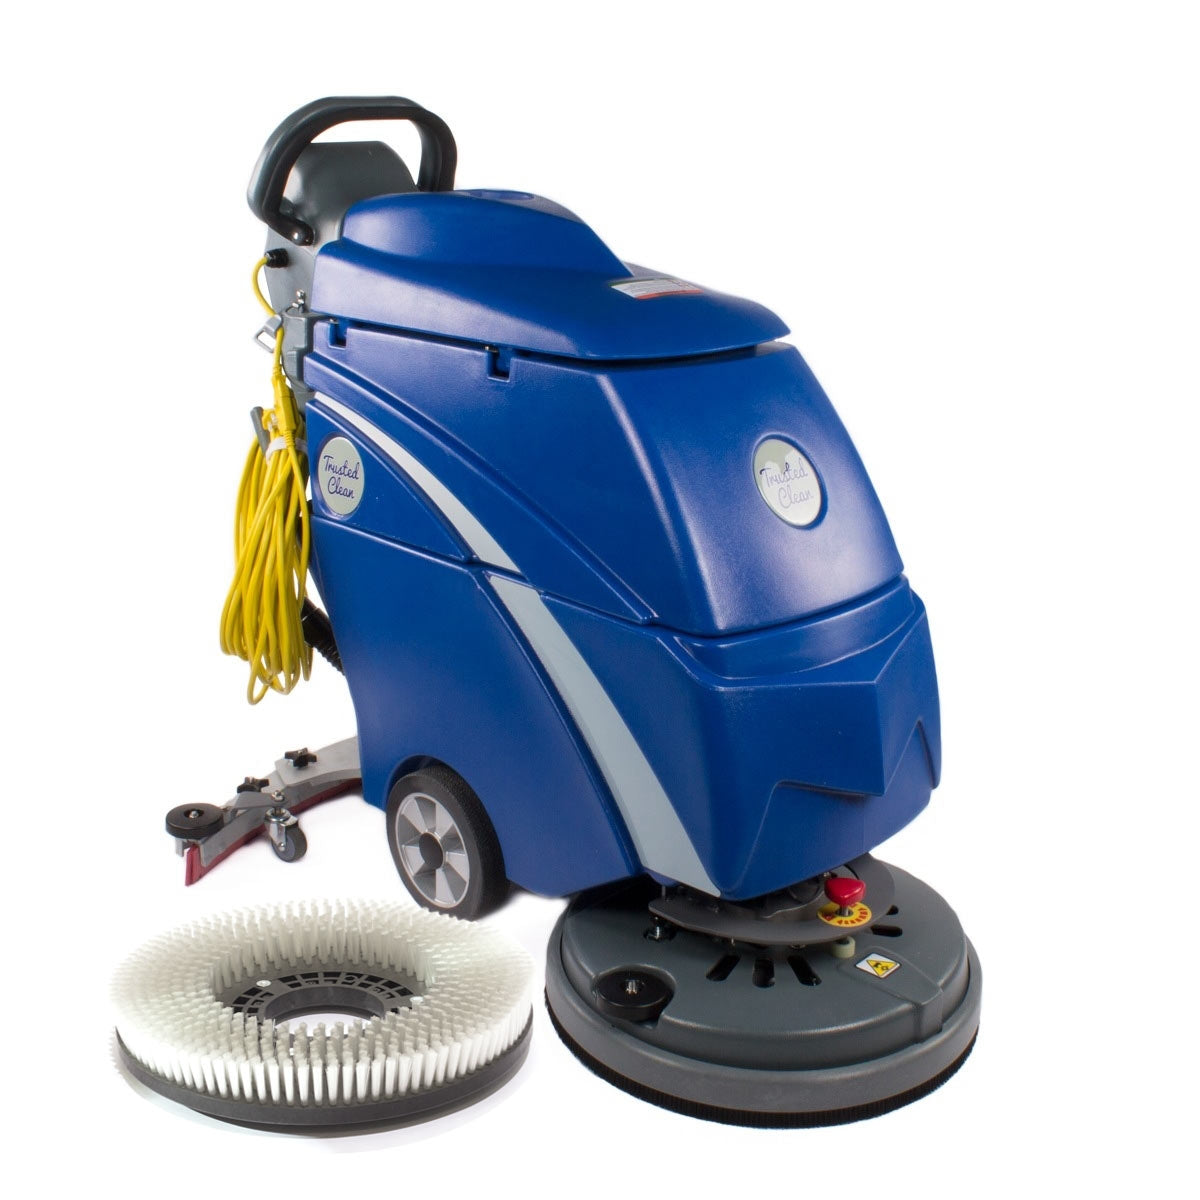 Household Sweeping Machine Automatic Carpet Sweeper Broom Electric